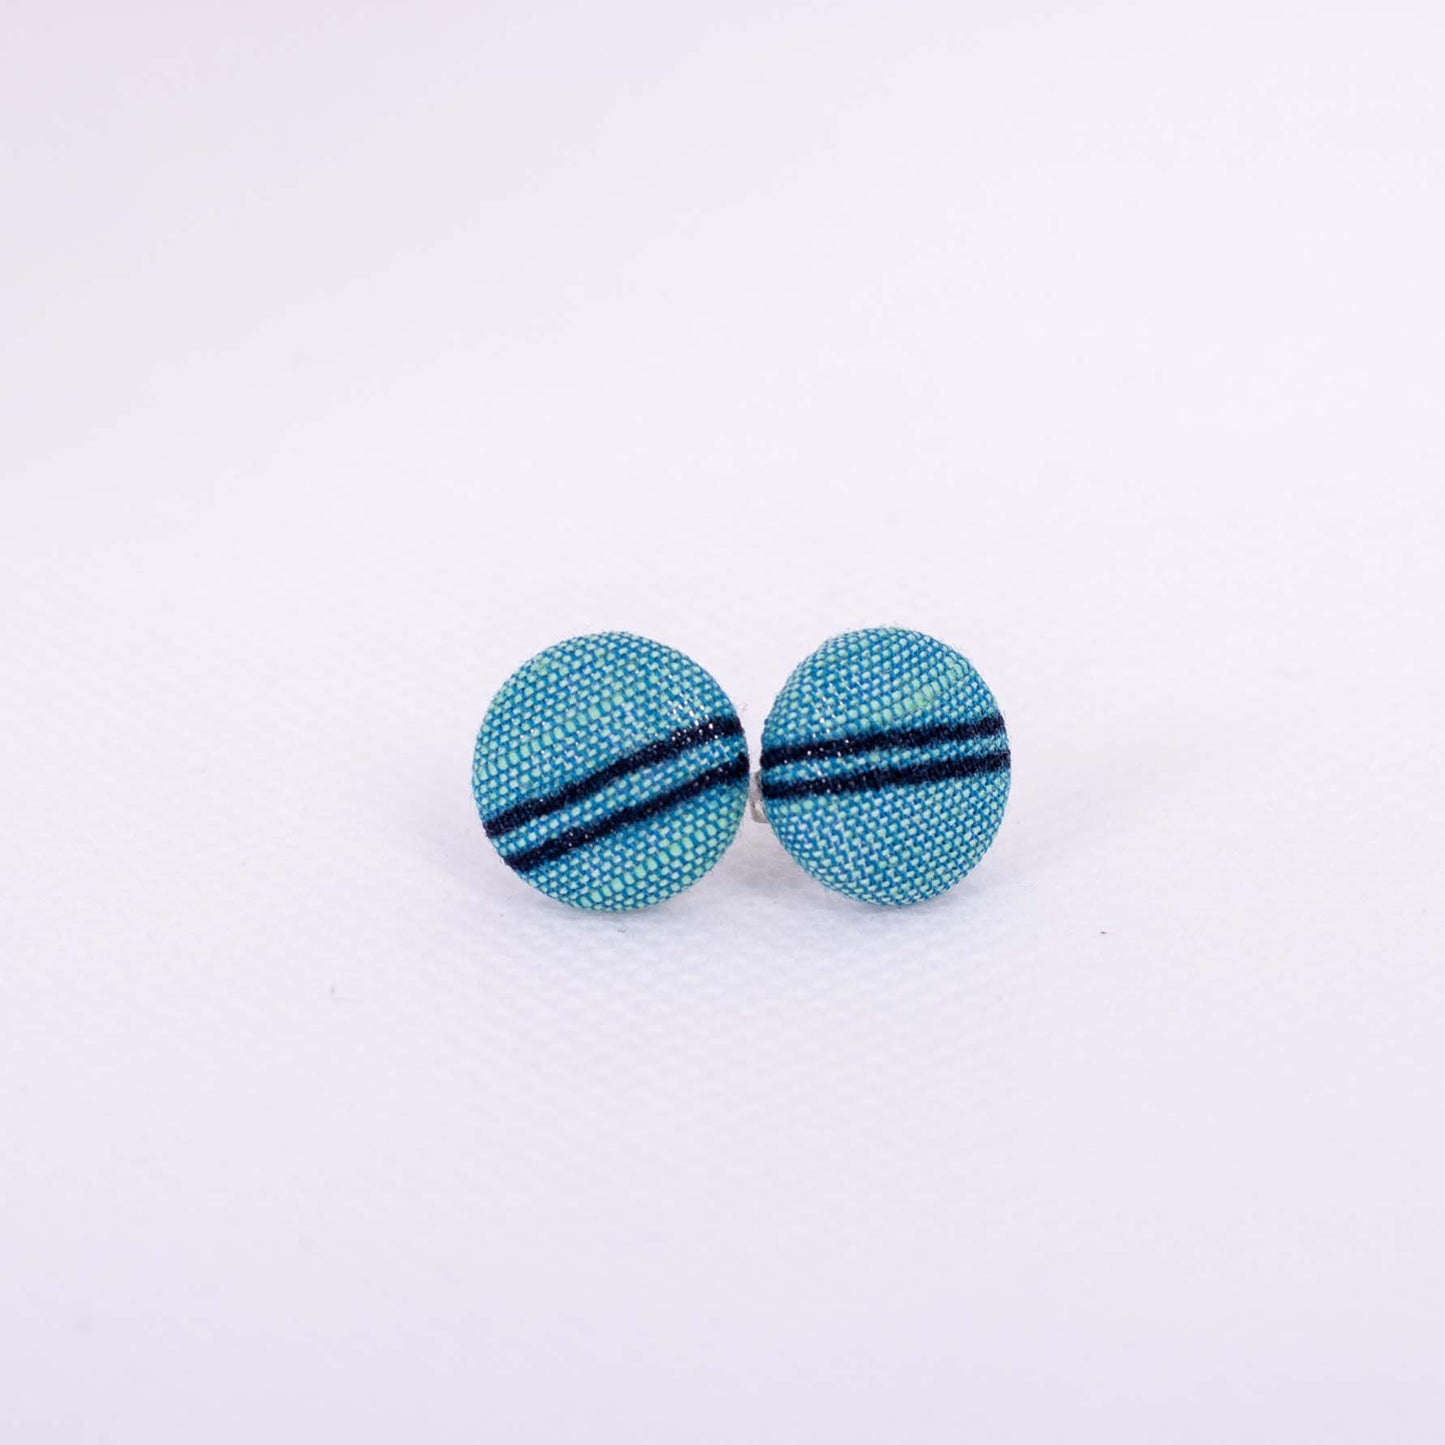 Turquoise linen button stud earrings from petone store